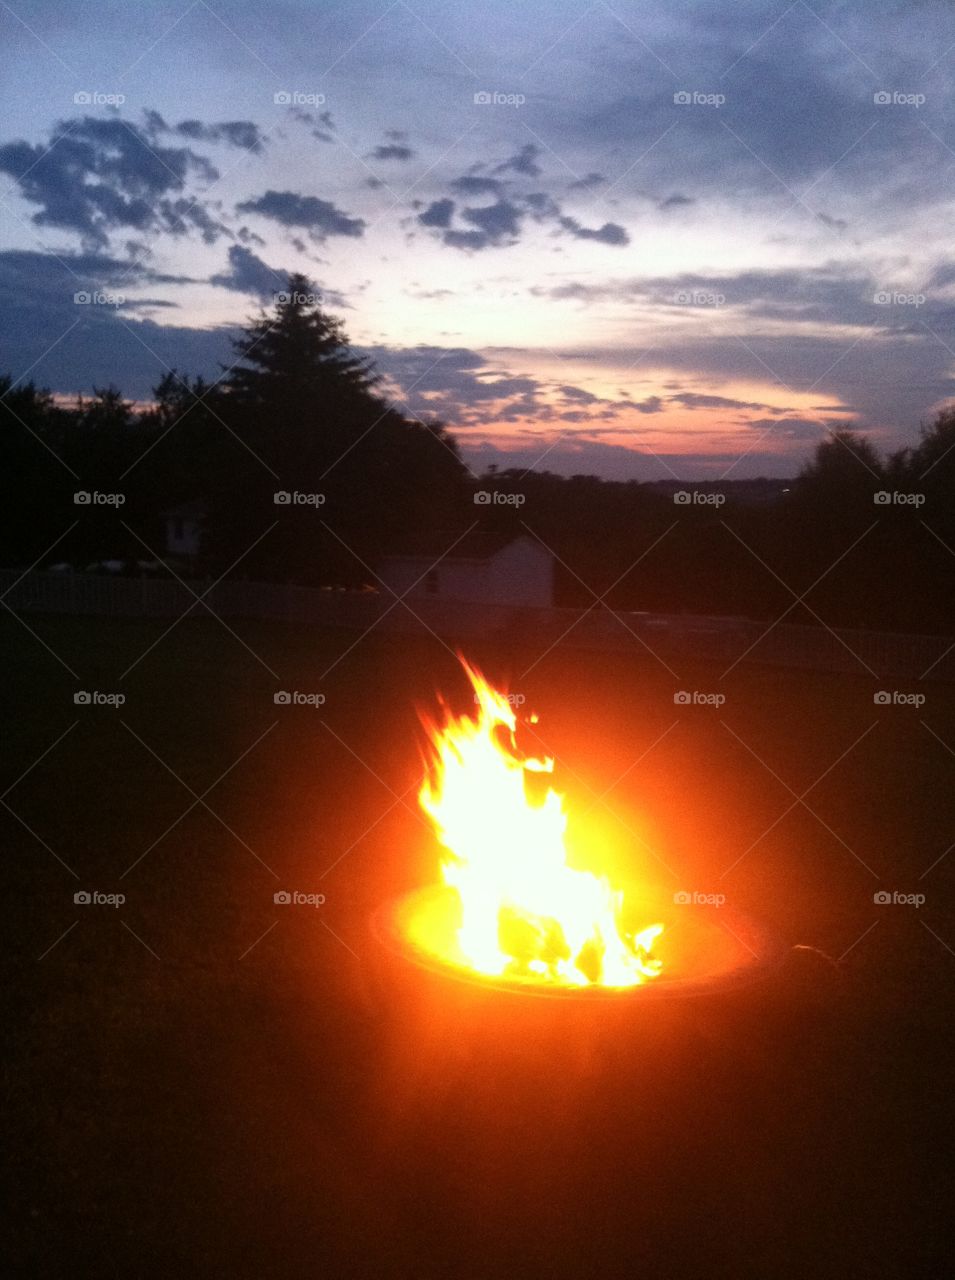 Fire pit and sunset view 